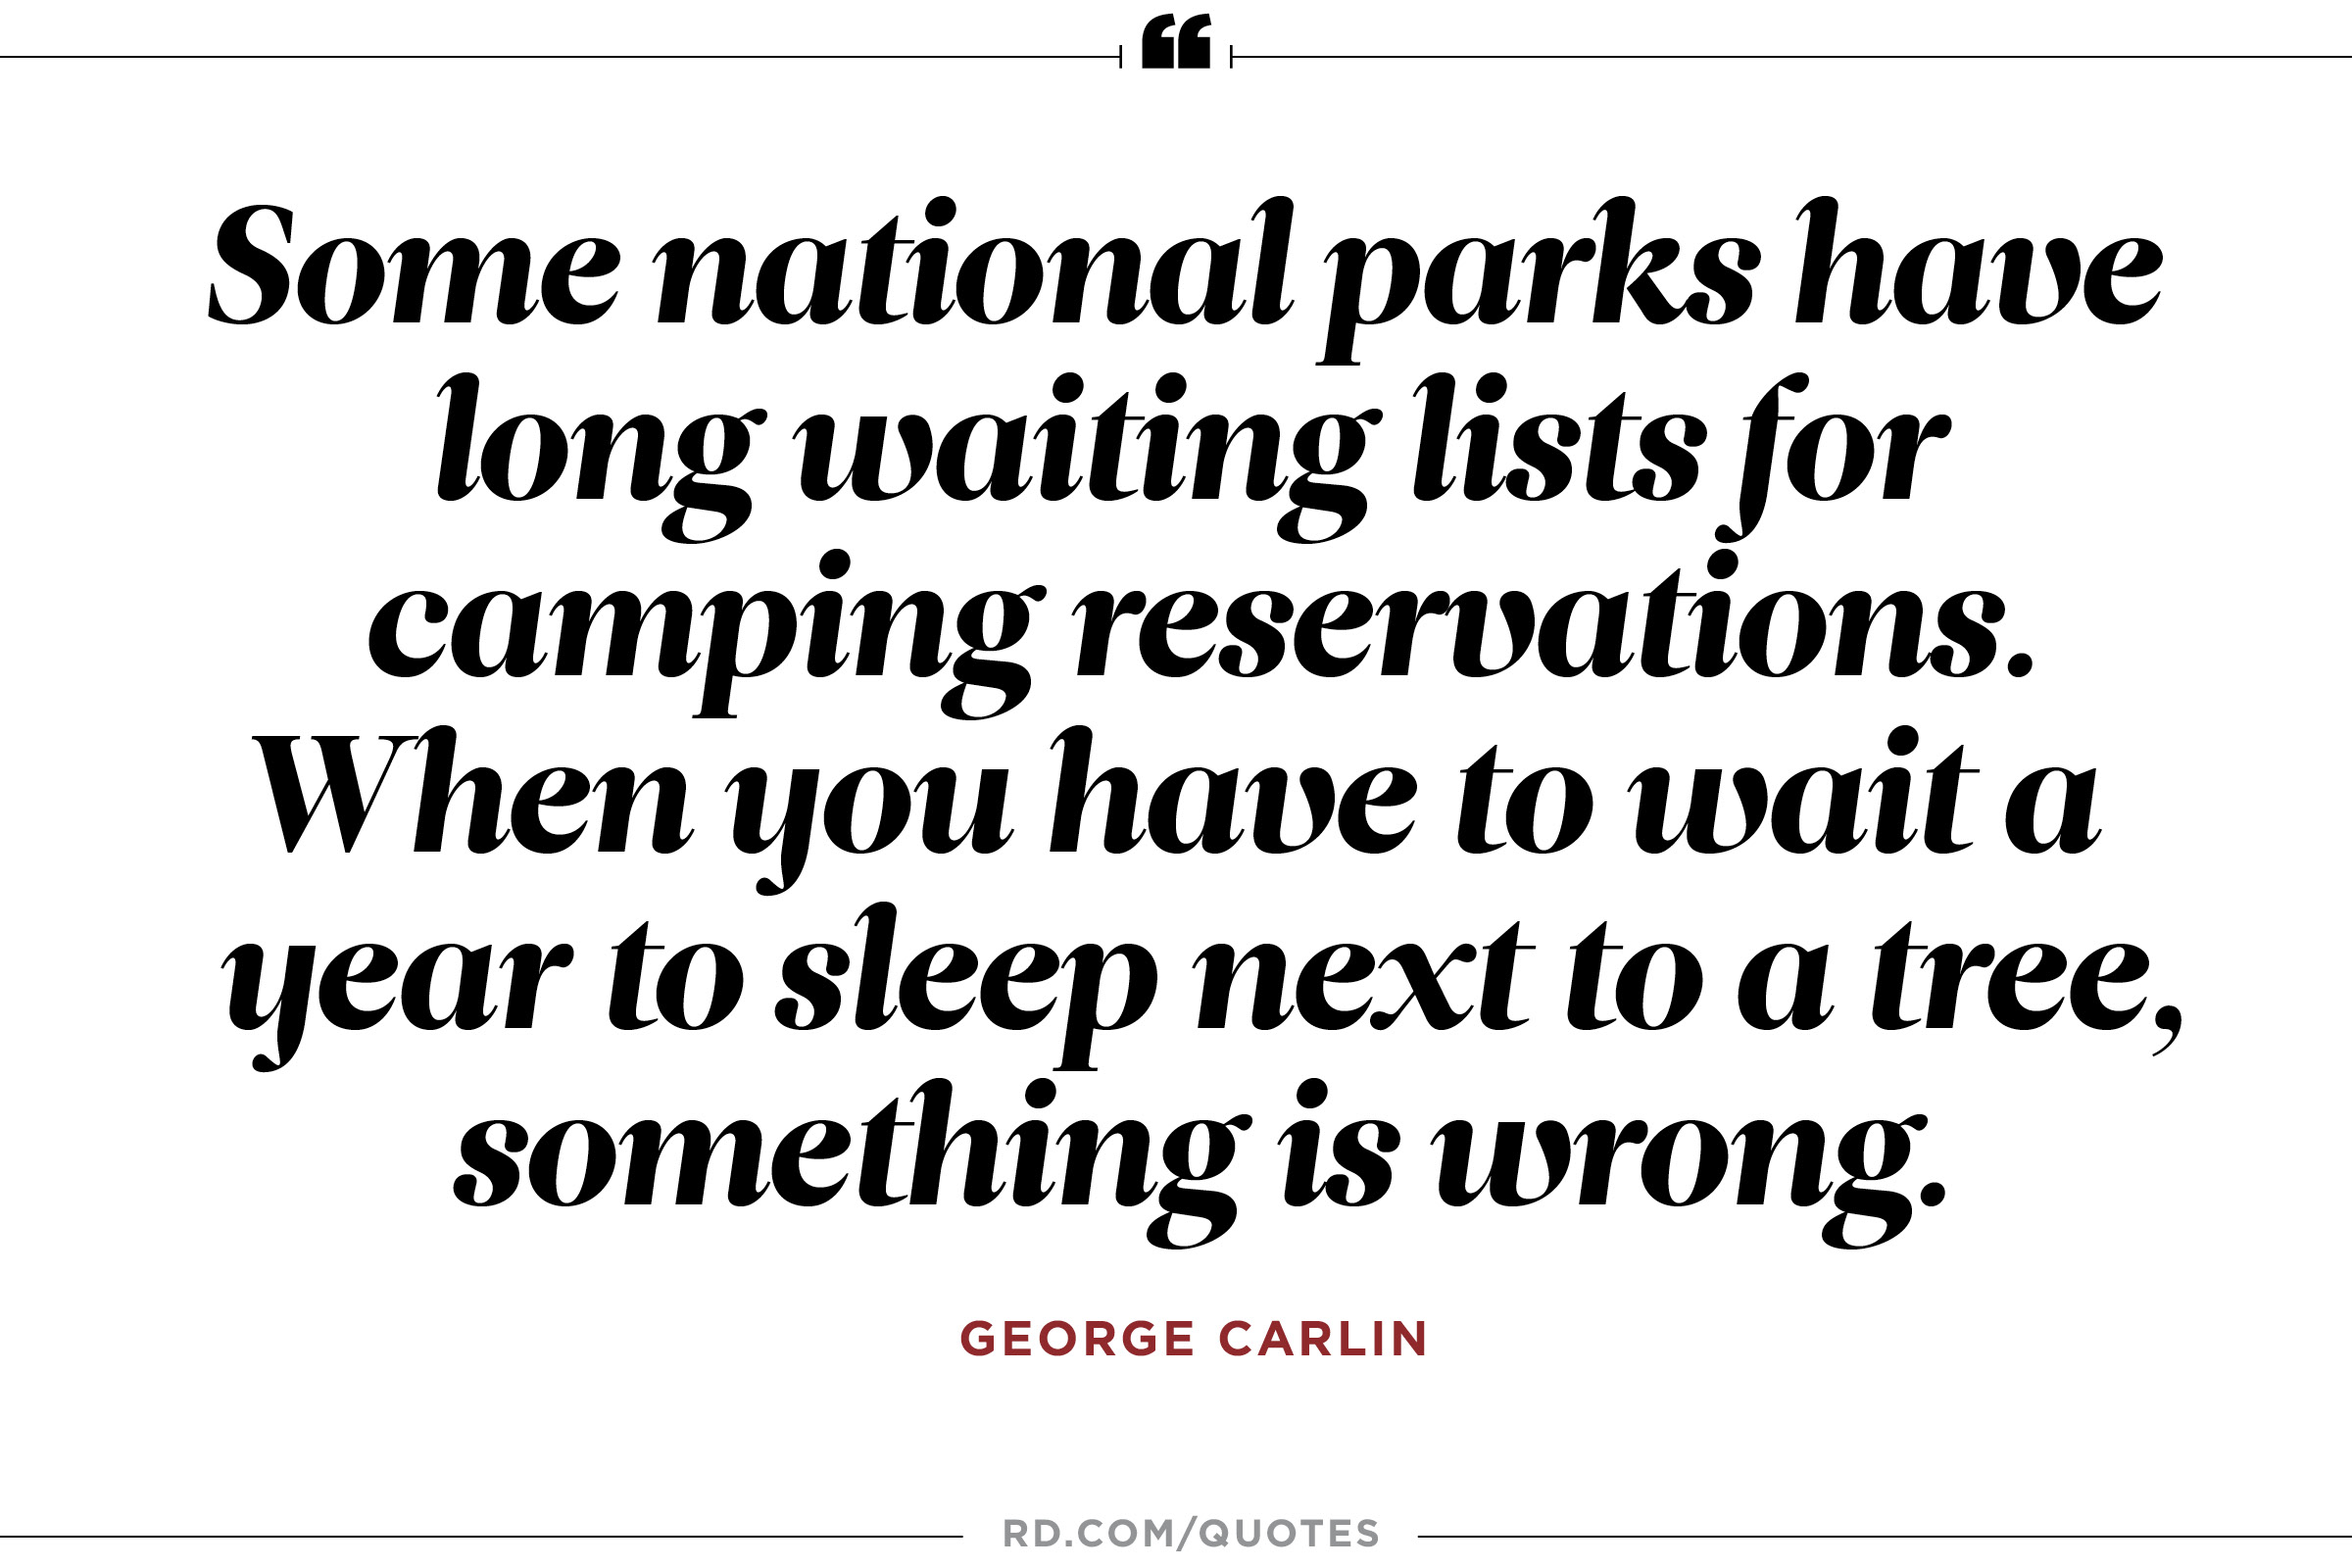 Some national parks have long waiting lists for camping reservations. When you have to wait a year to sleep next to a tree, something is wrong. George Carlin